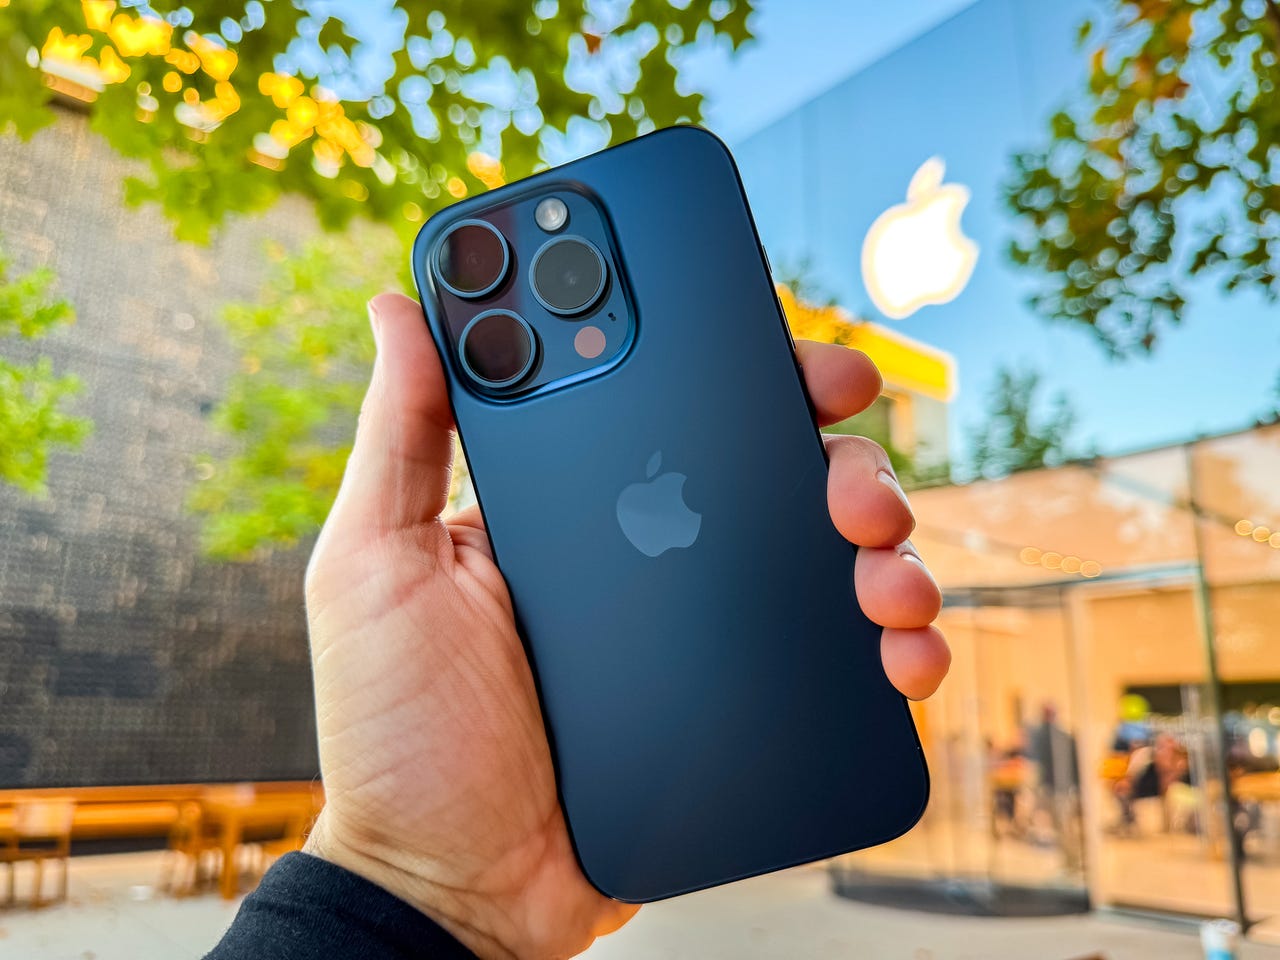 iPhone 15 Pro Max: 50 photos that show what the new camera system